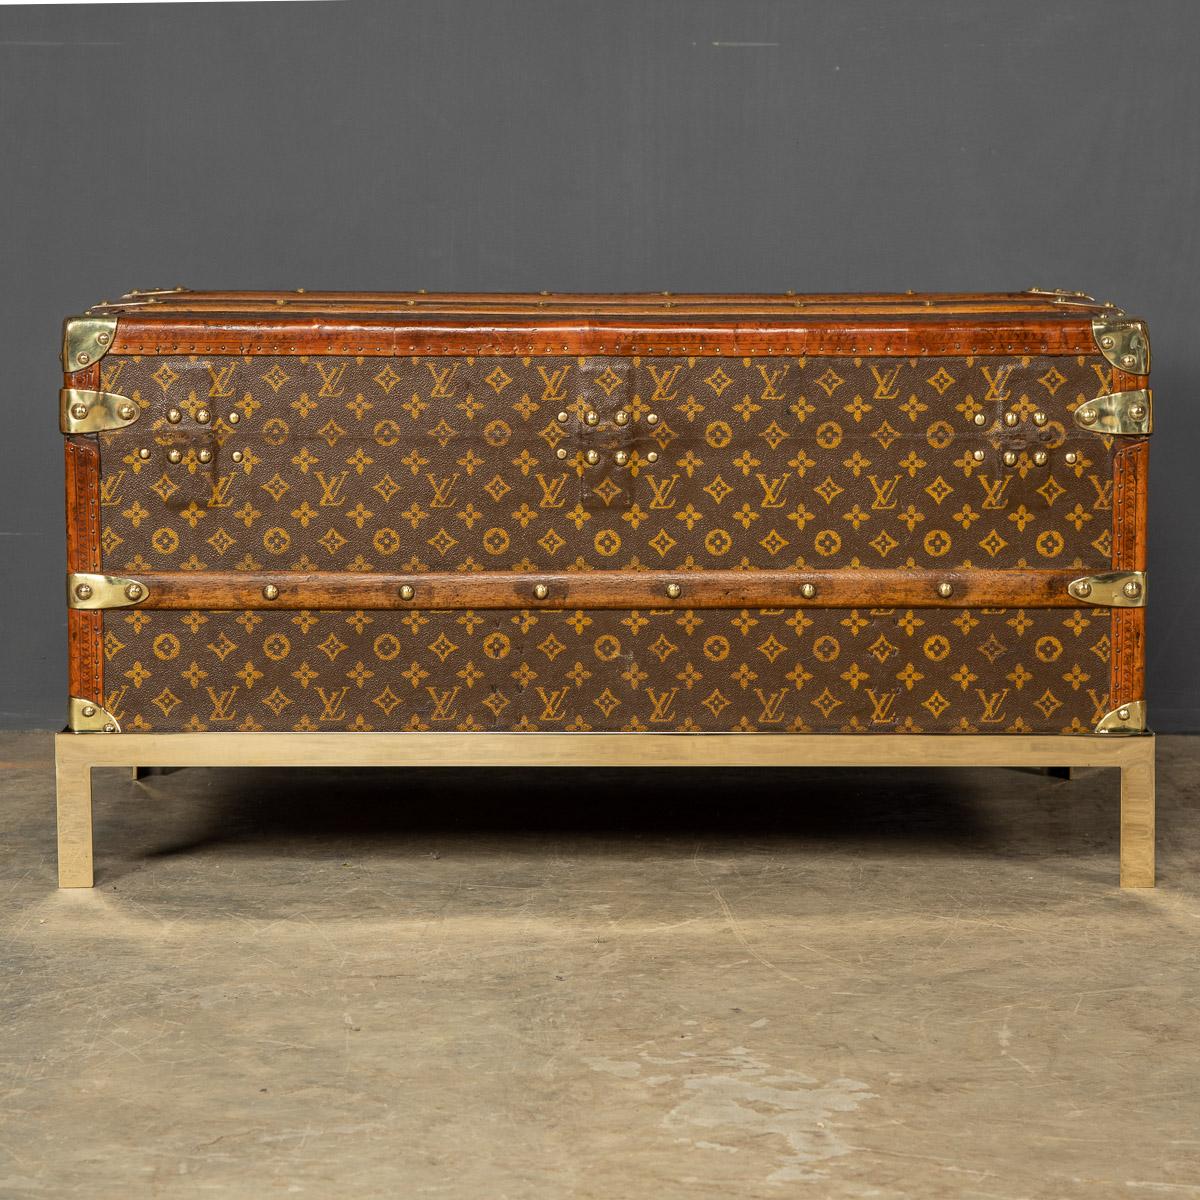 French 20th Century Louis Vuitton Cabin Trunk On A Bespoke Brass Stand, Paris, c.1920